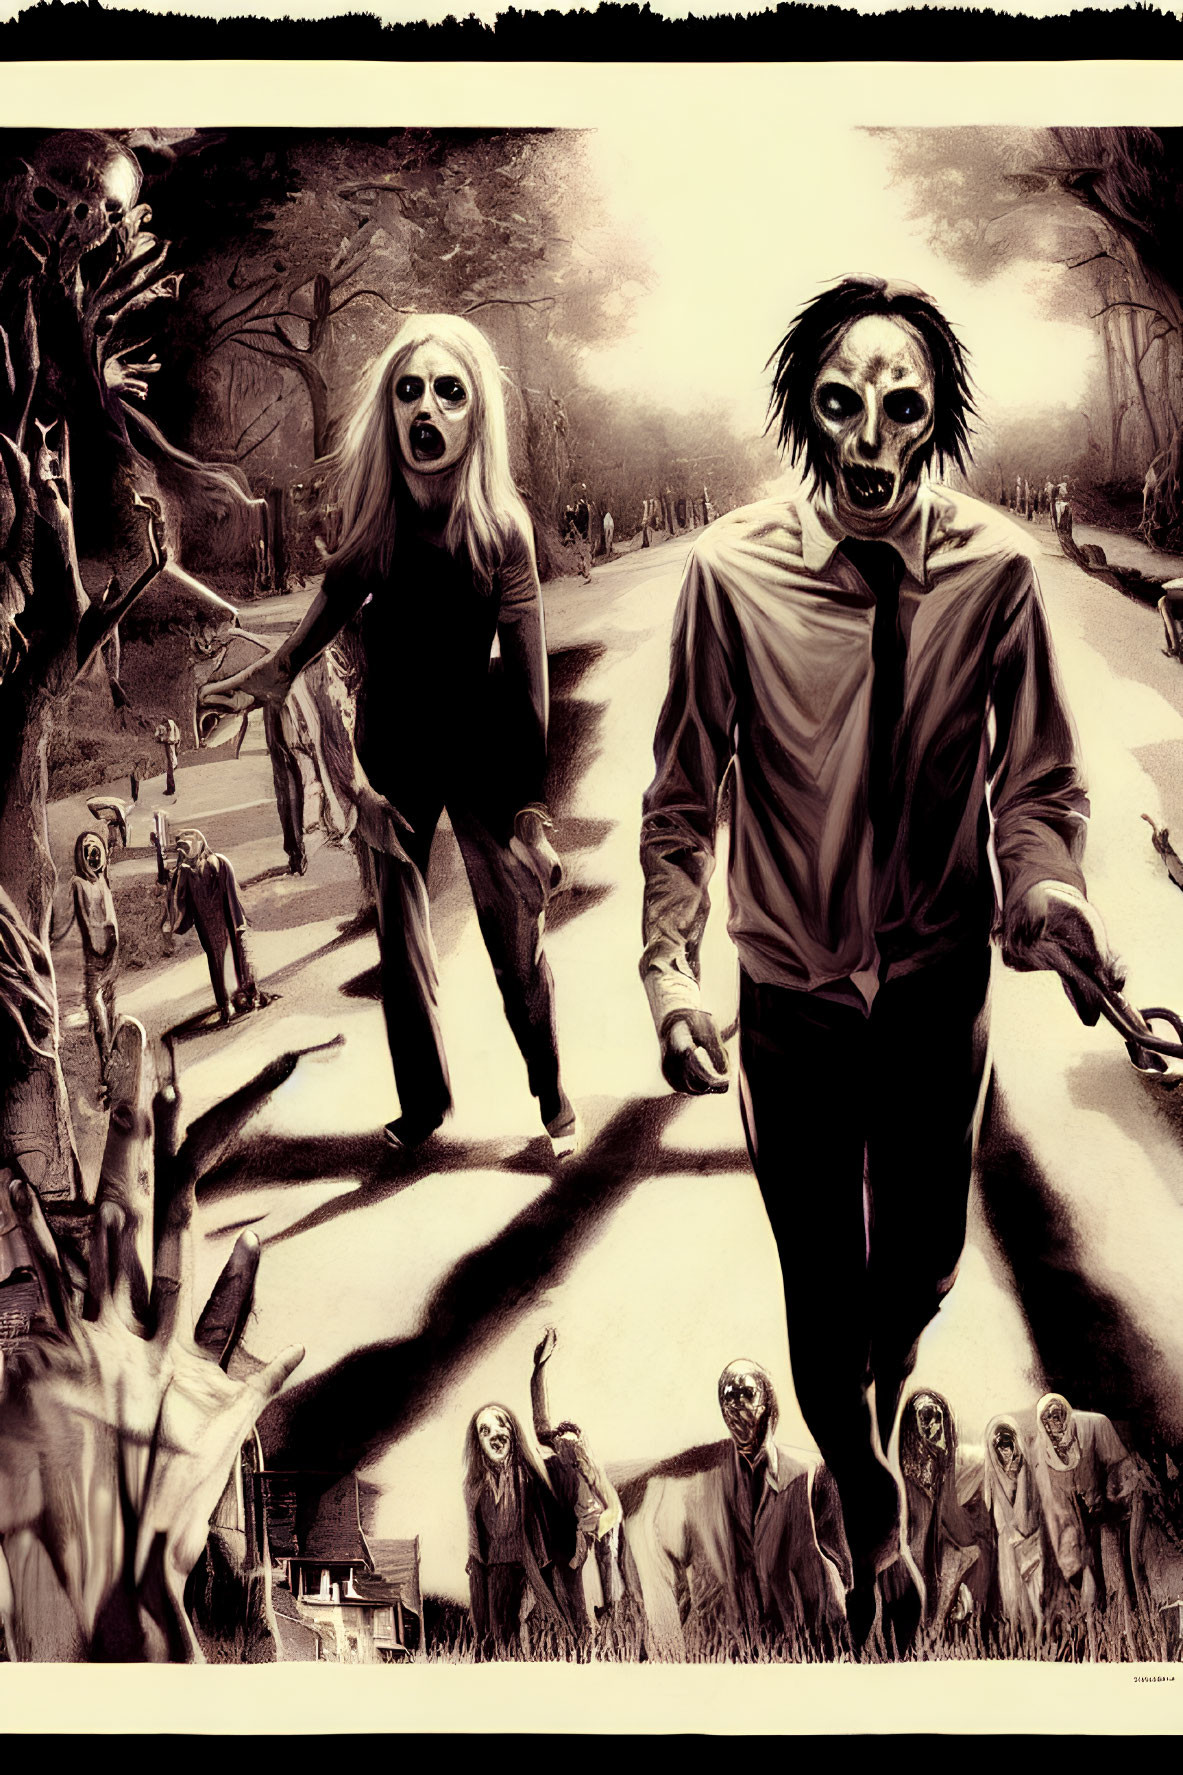 Illustration of grotesque zombies in dark graveyard setting